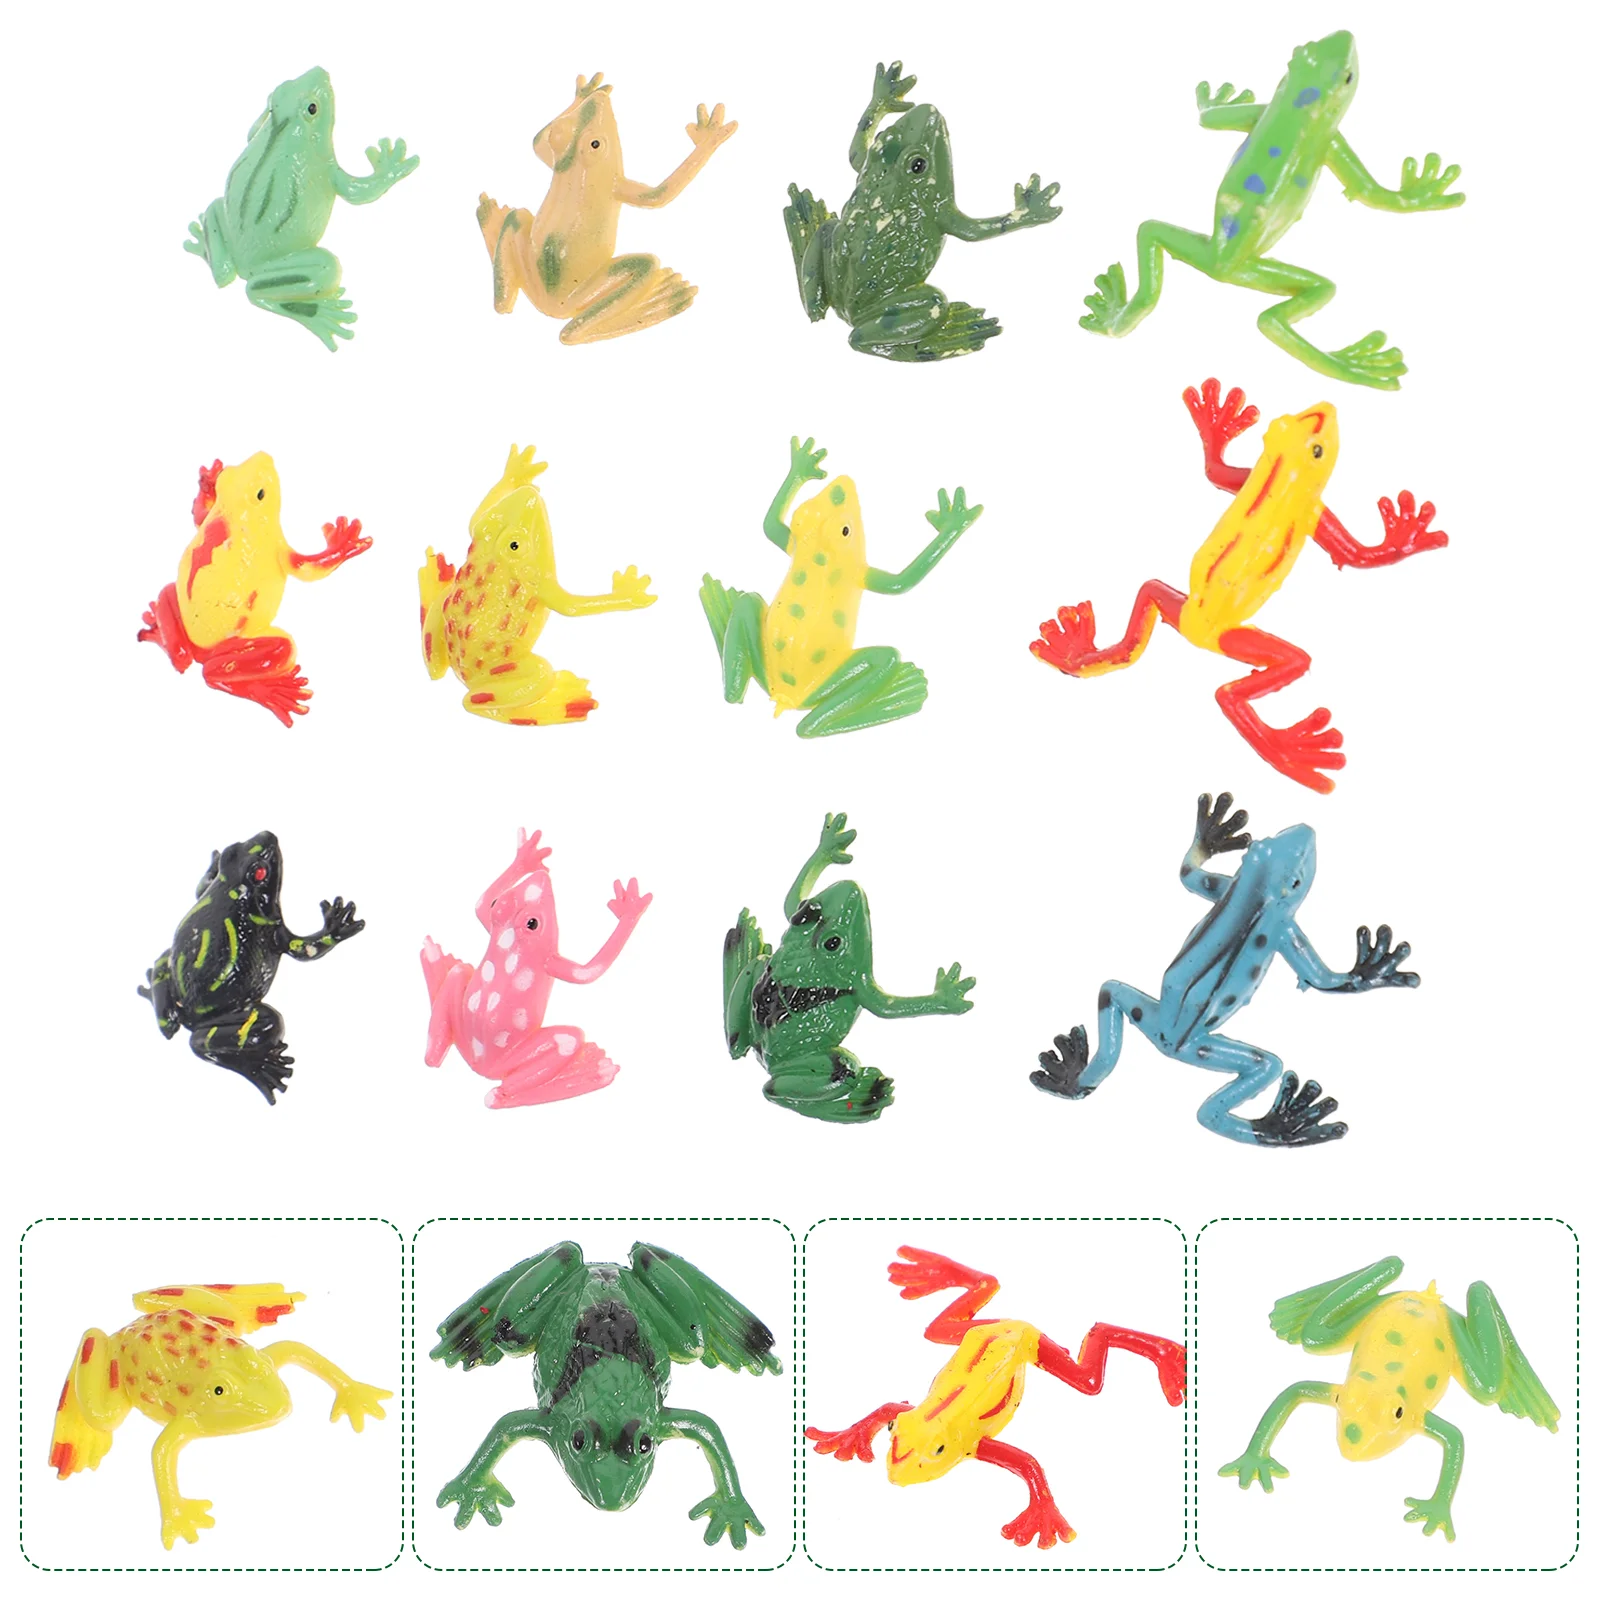 

12 Pcs Simulated Tropical Tree Frog Frogs Party Decorations Plastic Models Goldfish Birthday Pvc Figurines Child Mini Toys Kids